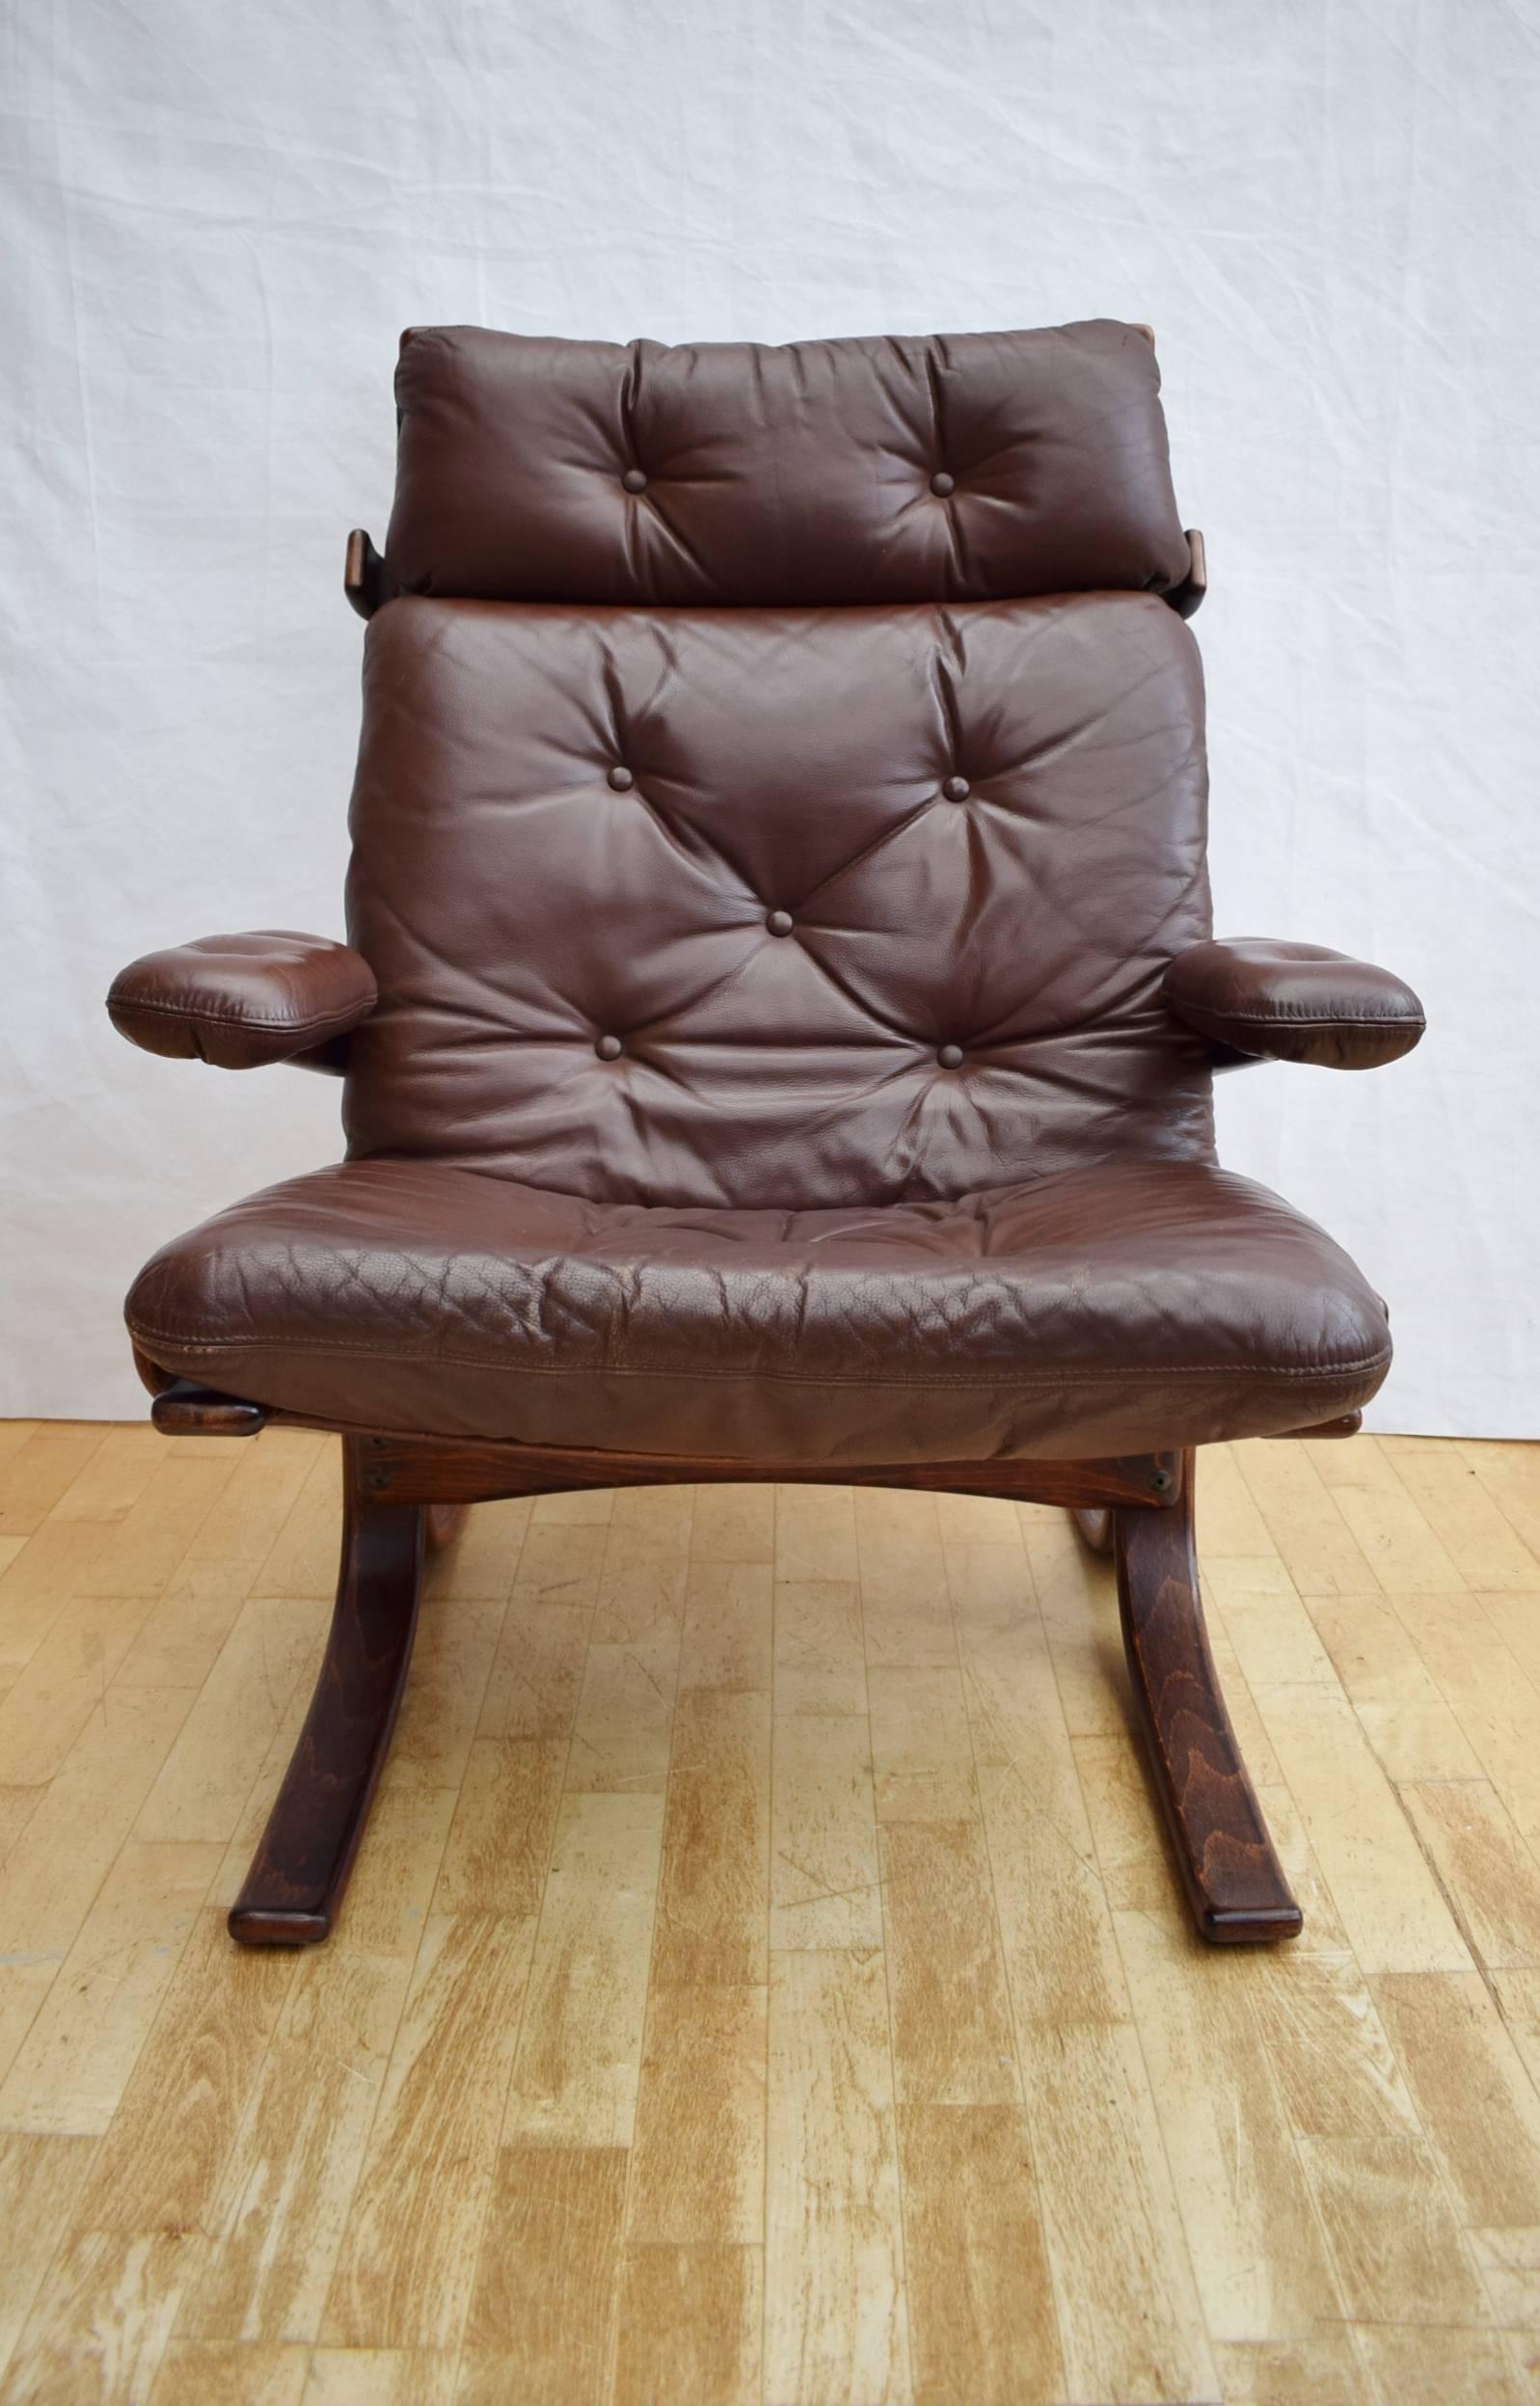 Designer: Norwegian Design

Manufacturer: Westnofa

Country: Norway

Date: 1970s

Material: Beechwood frame with genuine brown leather upholstery

Maximum dimensions: Width 82cm, depth 80cm, height 94cm and seat height 44cm

Condition: